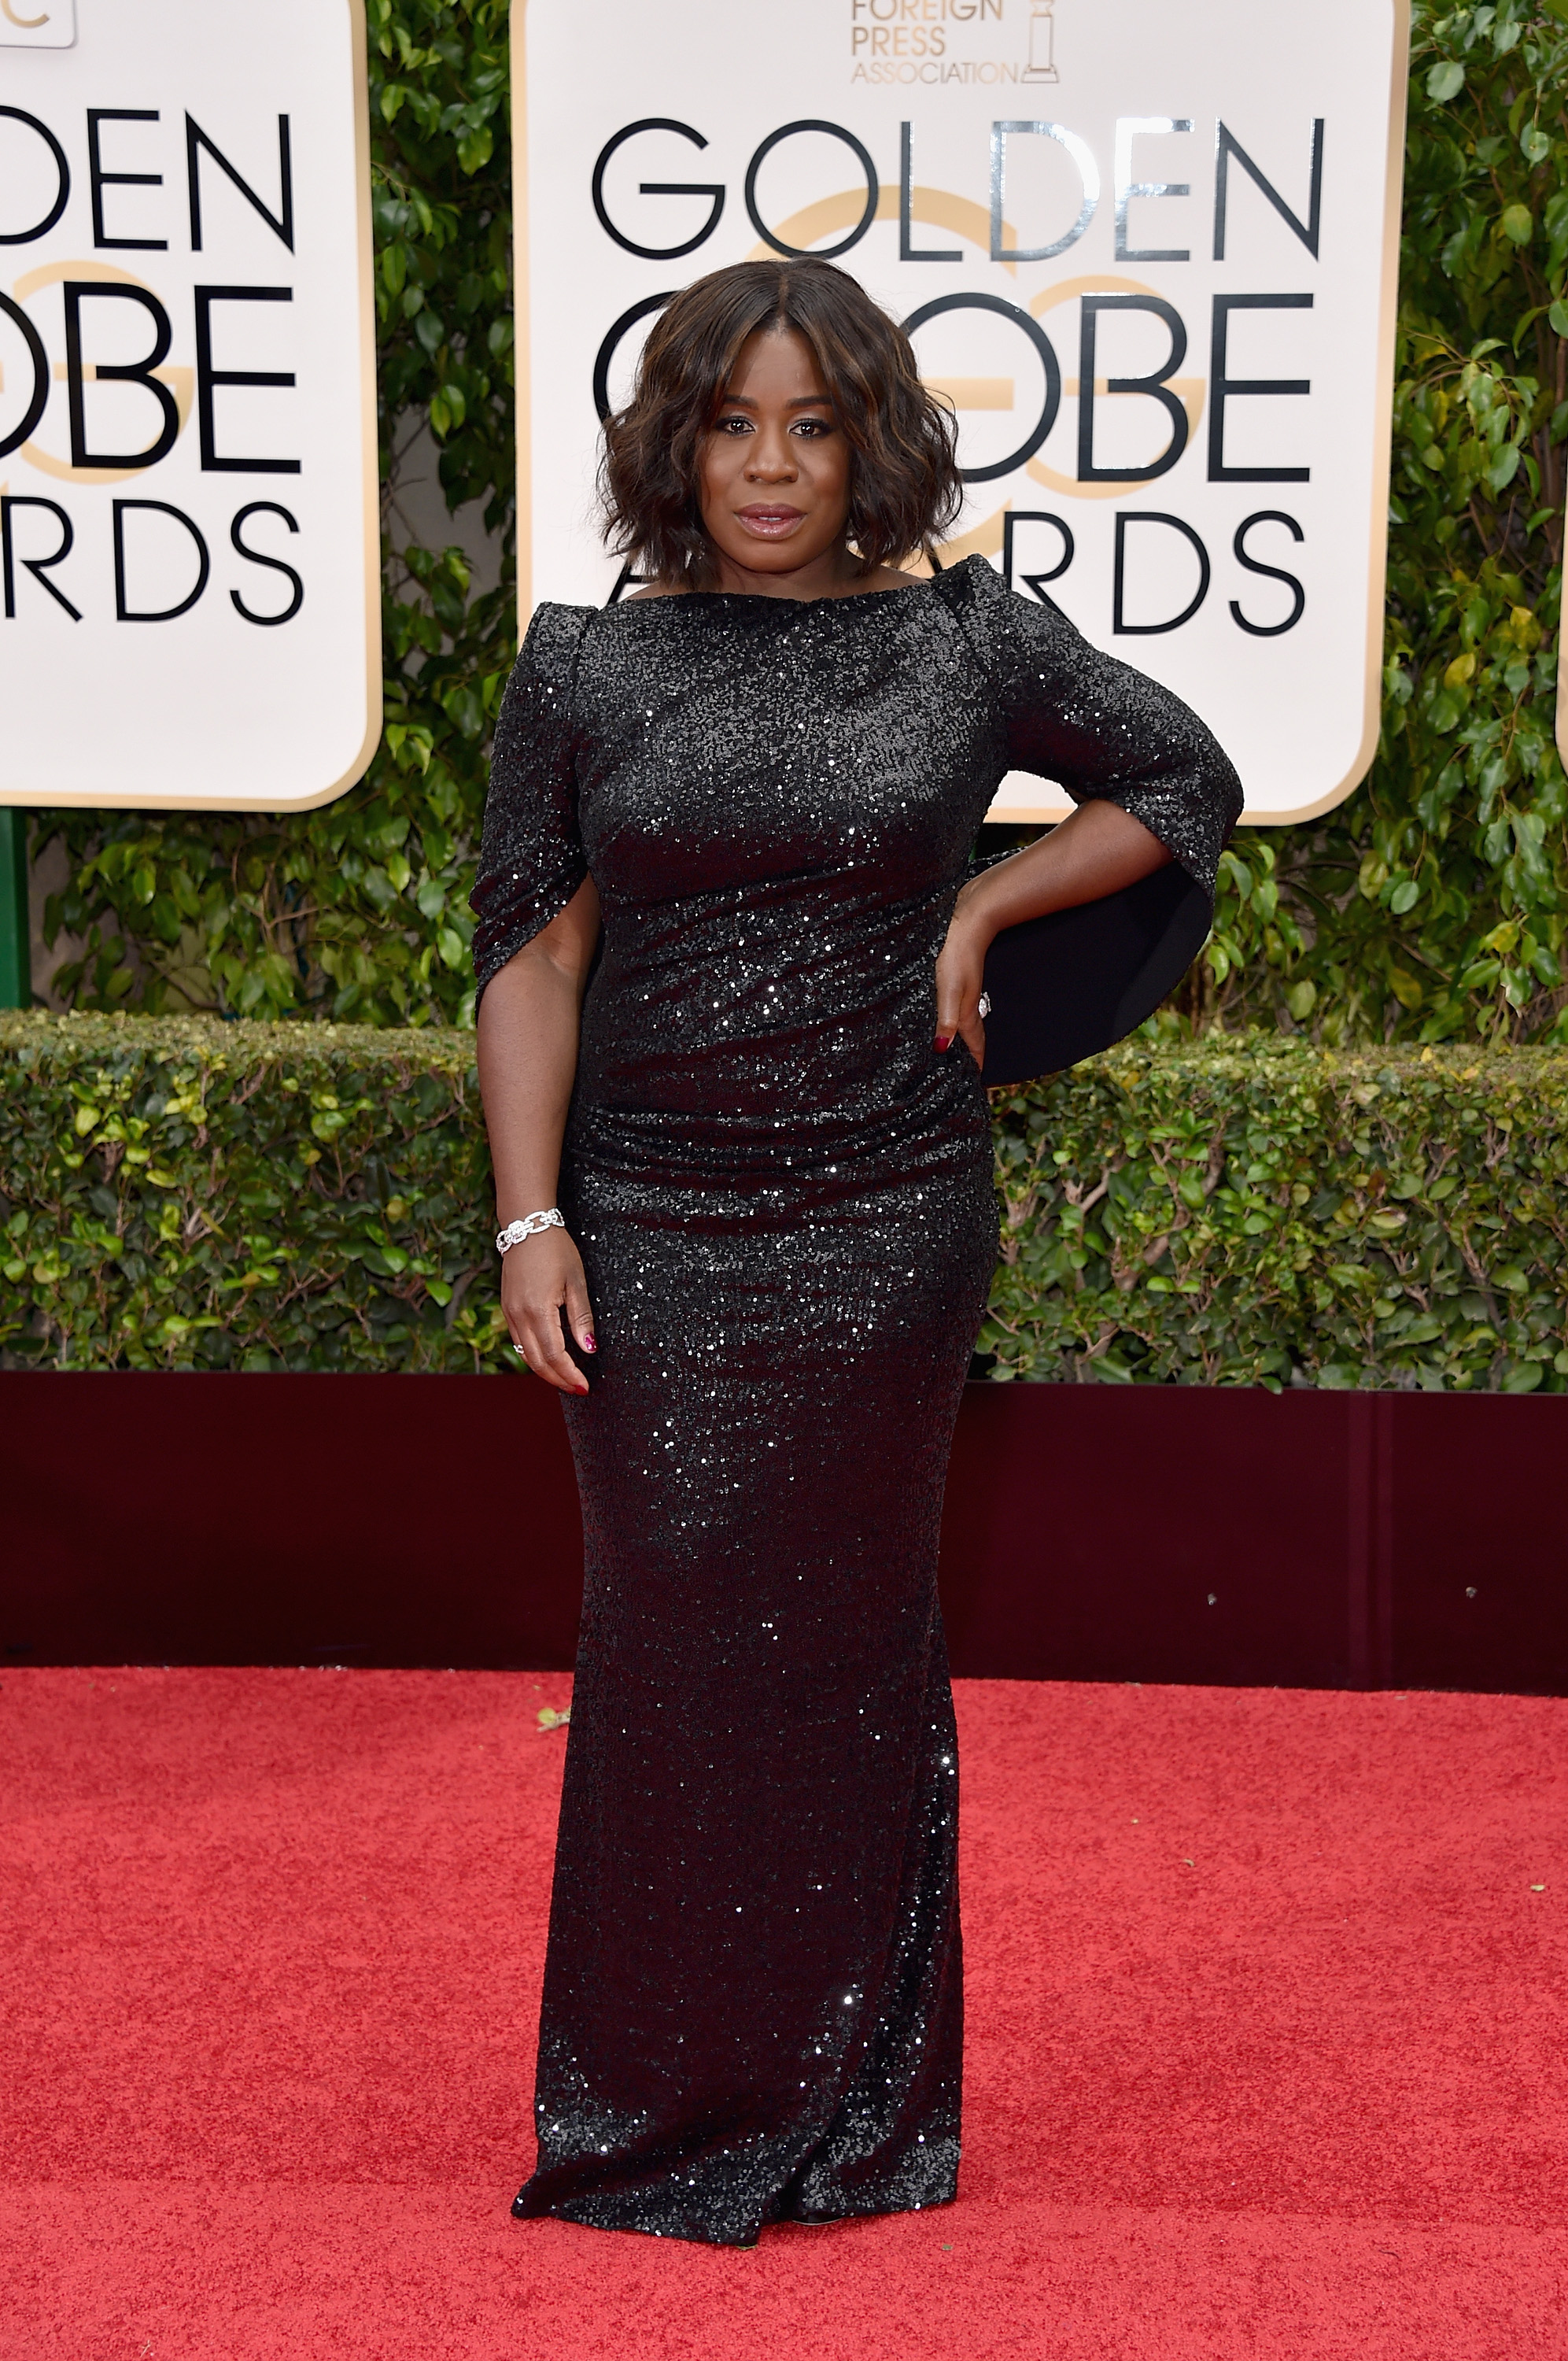 Uzo Aduba arrives to the 73rd Annual Golden Globe Awards on Jan. 10, 2016 in Beverly Hills.